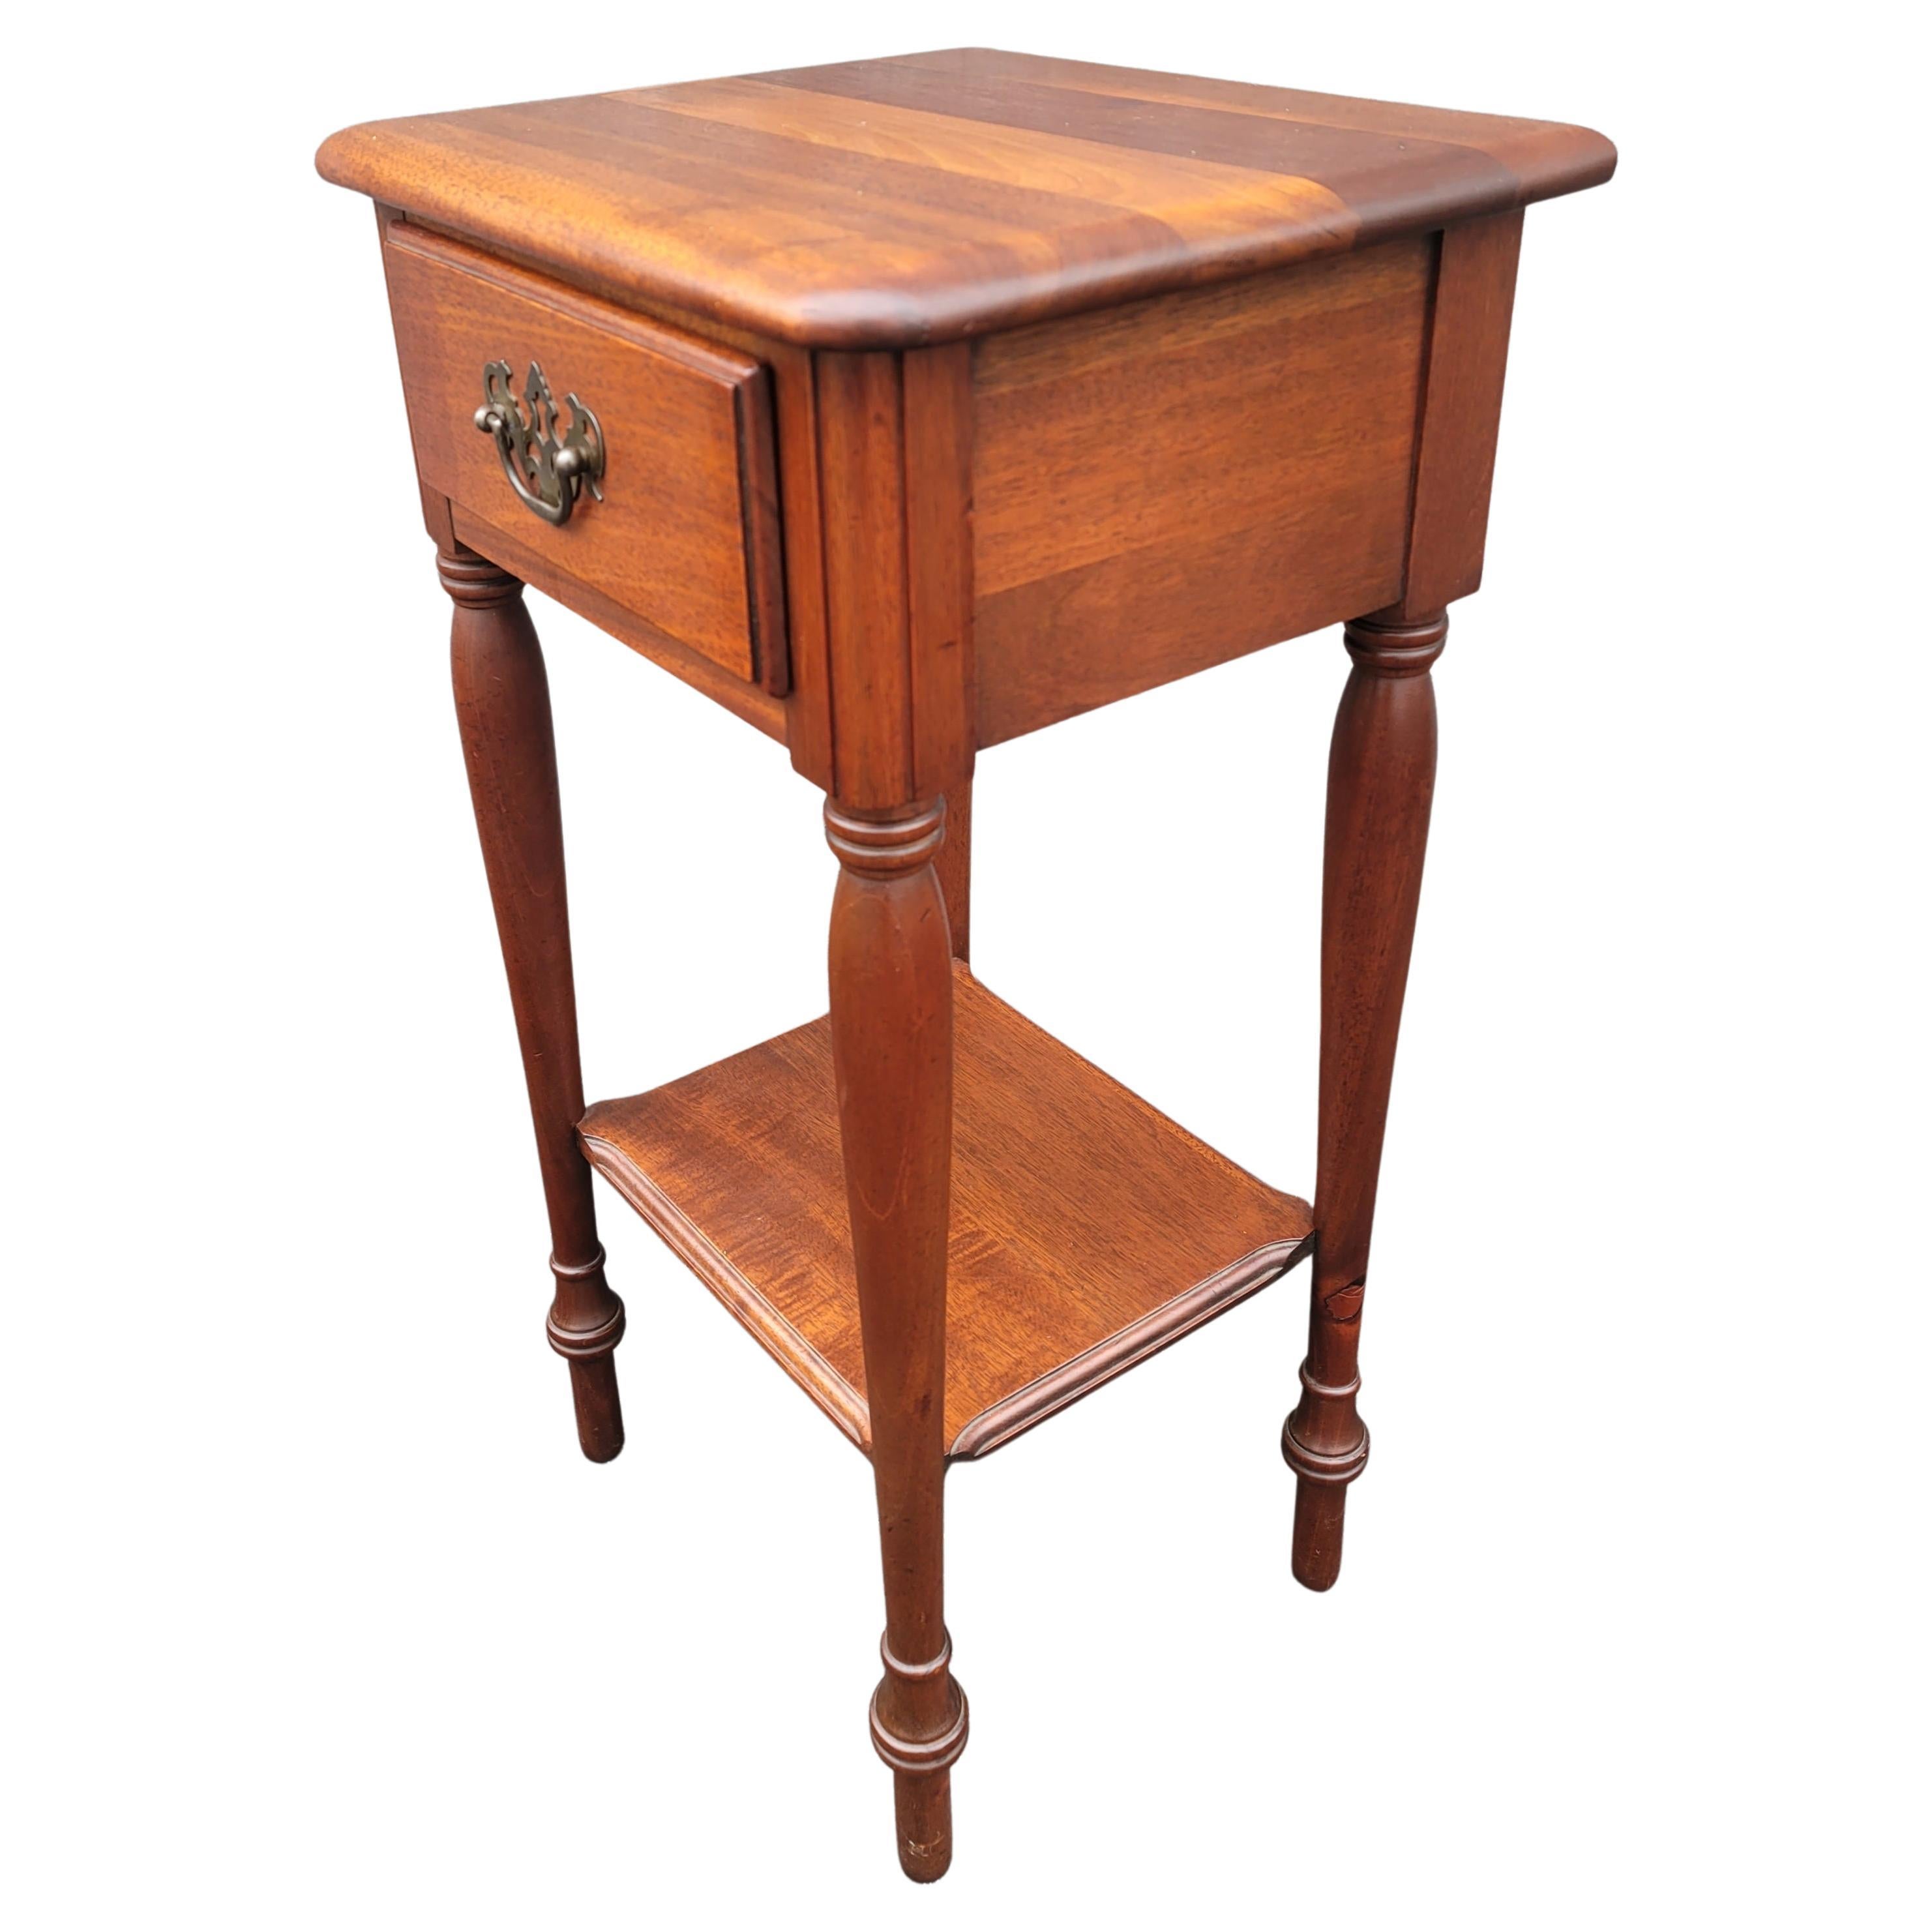 American Classical 1960s Refinished Kling Factories Two Tier Solid Mahogany Side Table For Sale